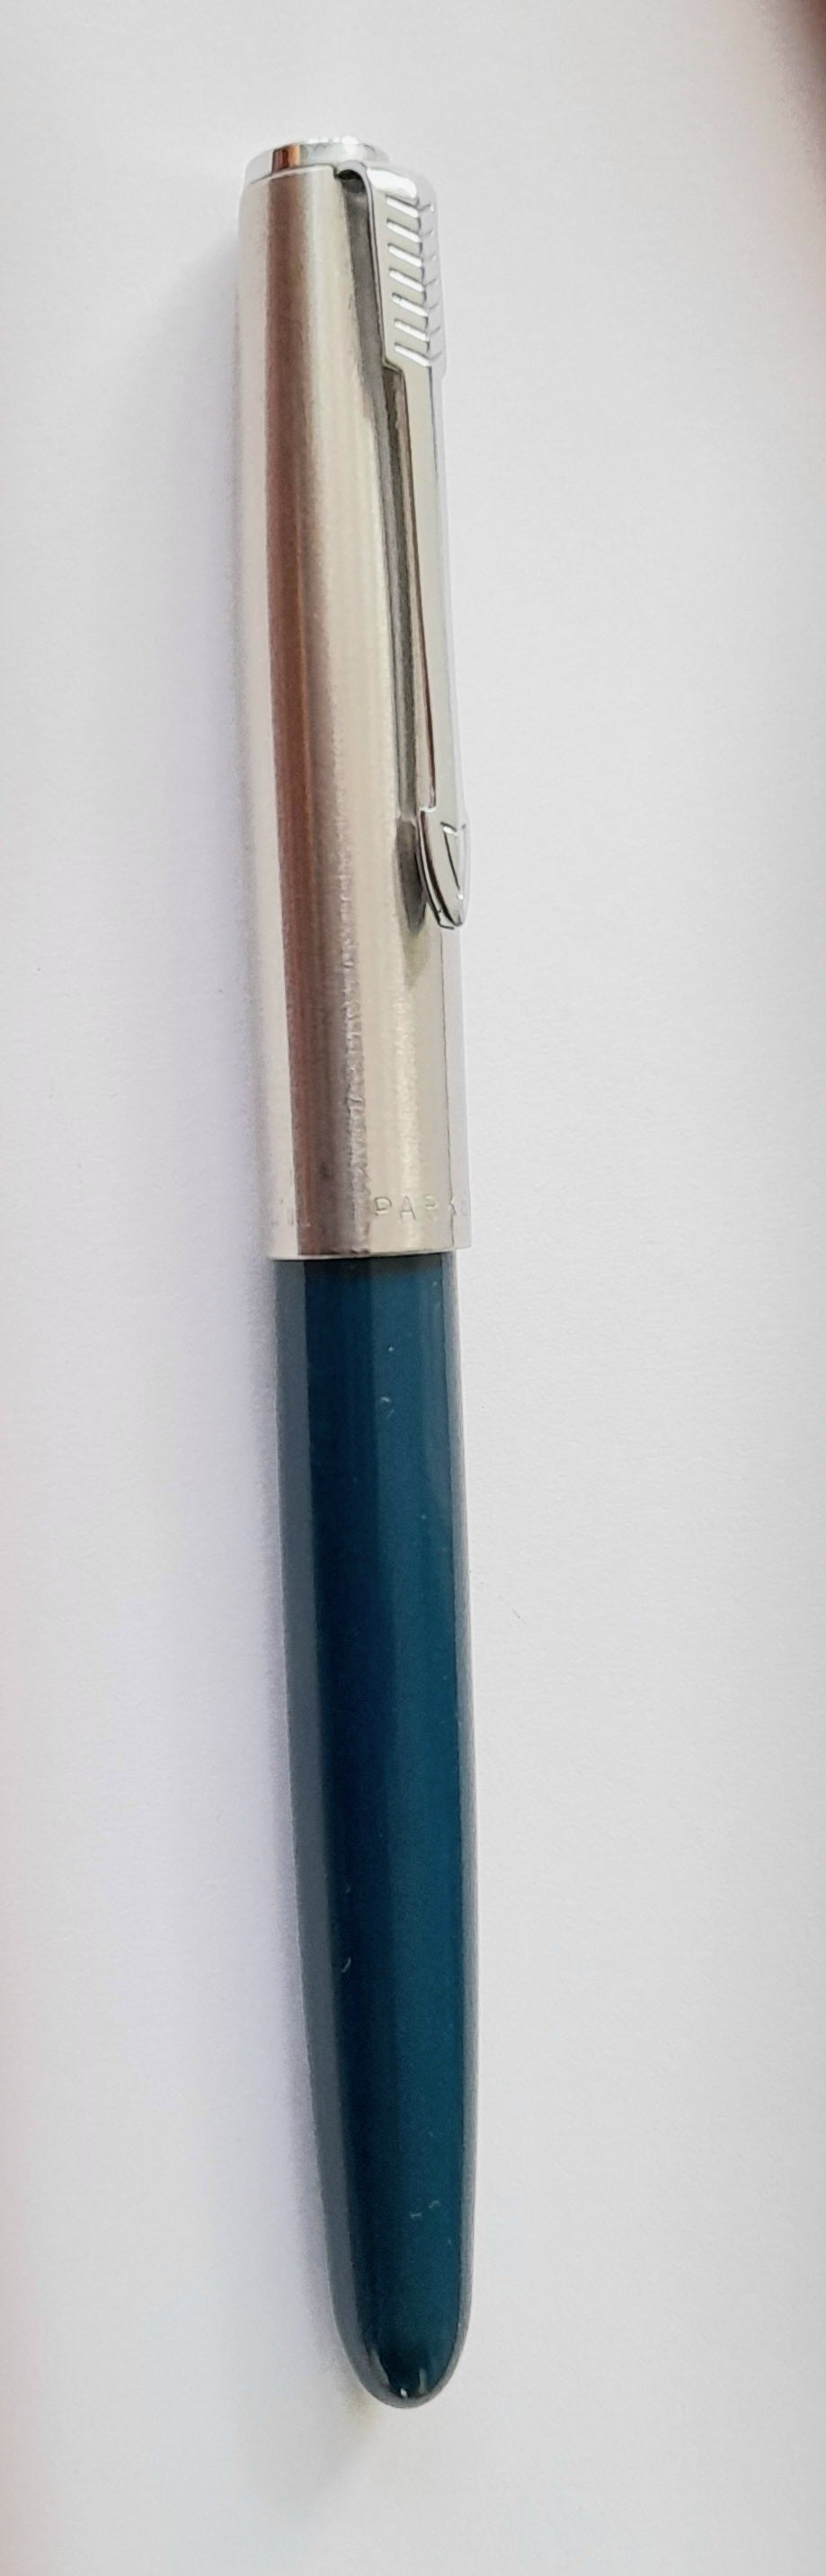 Parker 51 Silveralloy Cap and Forced Green Body fountain Pen.